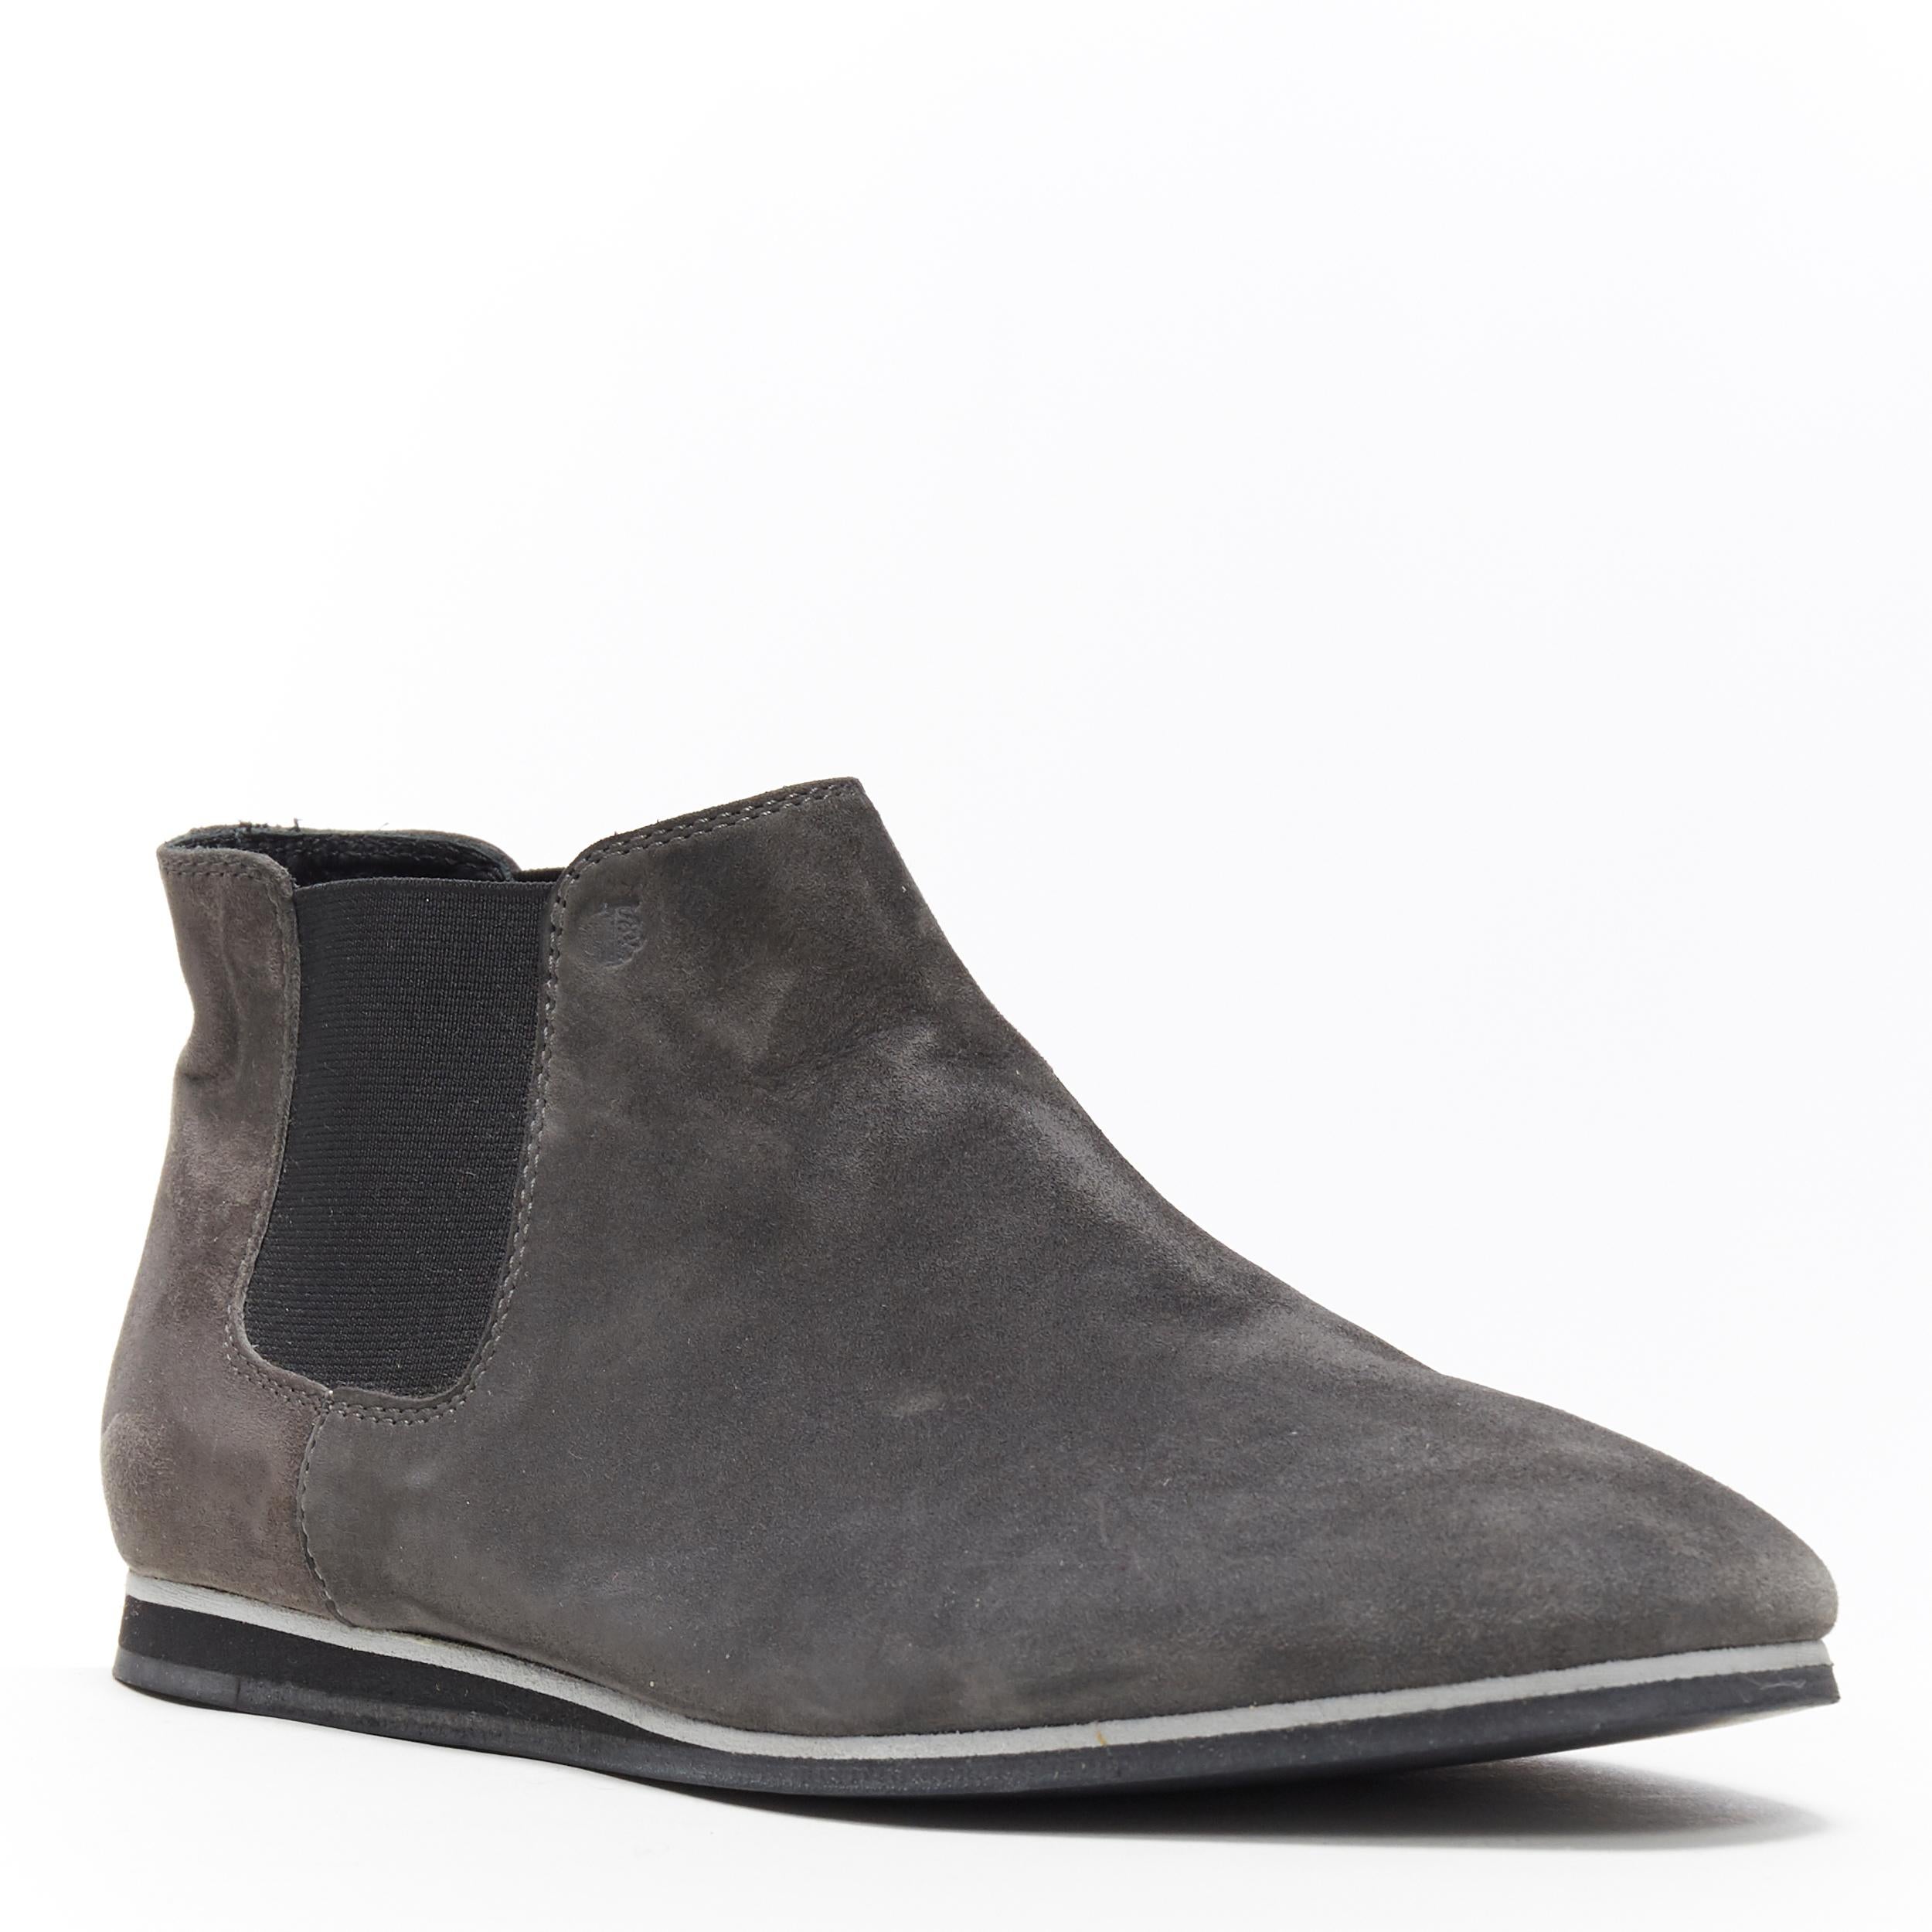 TOD'S No Code dark grey suede elastic gusset round toe flat ankle bootie EU37
Brand: Tod's
Model Name / Style: Ankle boots
Material: Suede
Color: Grey
Pattern: Solid
Closure: Slip on
Lining material: Leather
Extra Detail: Pull tab stitched on inner